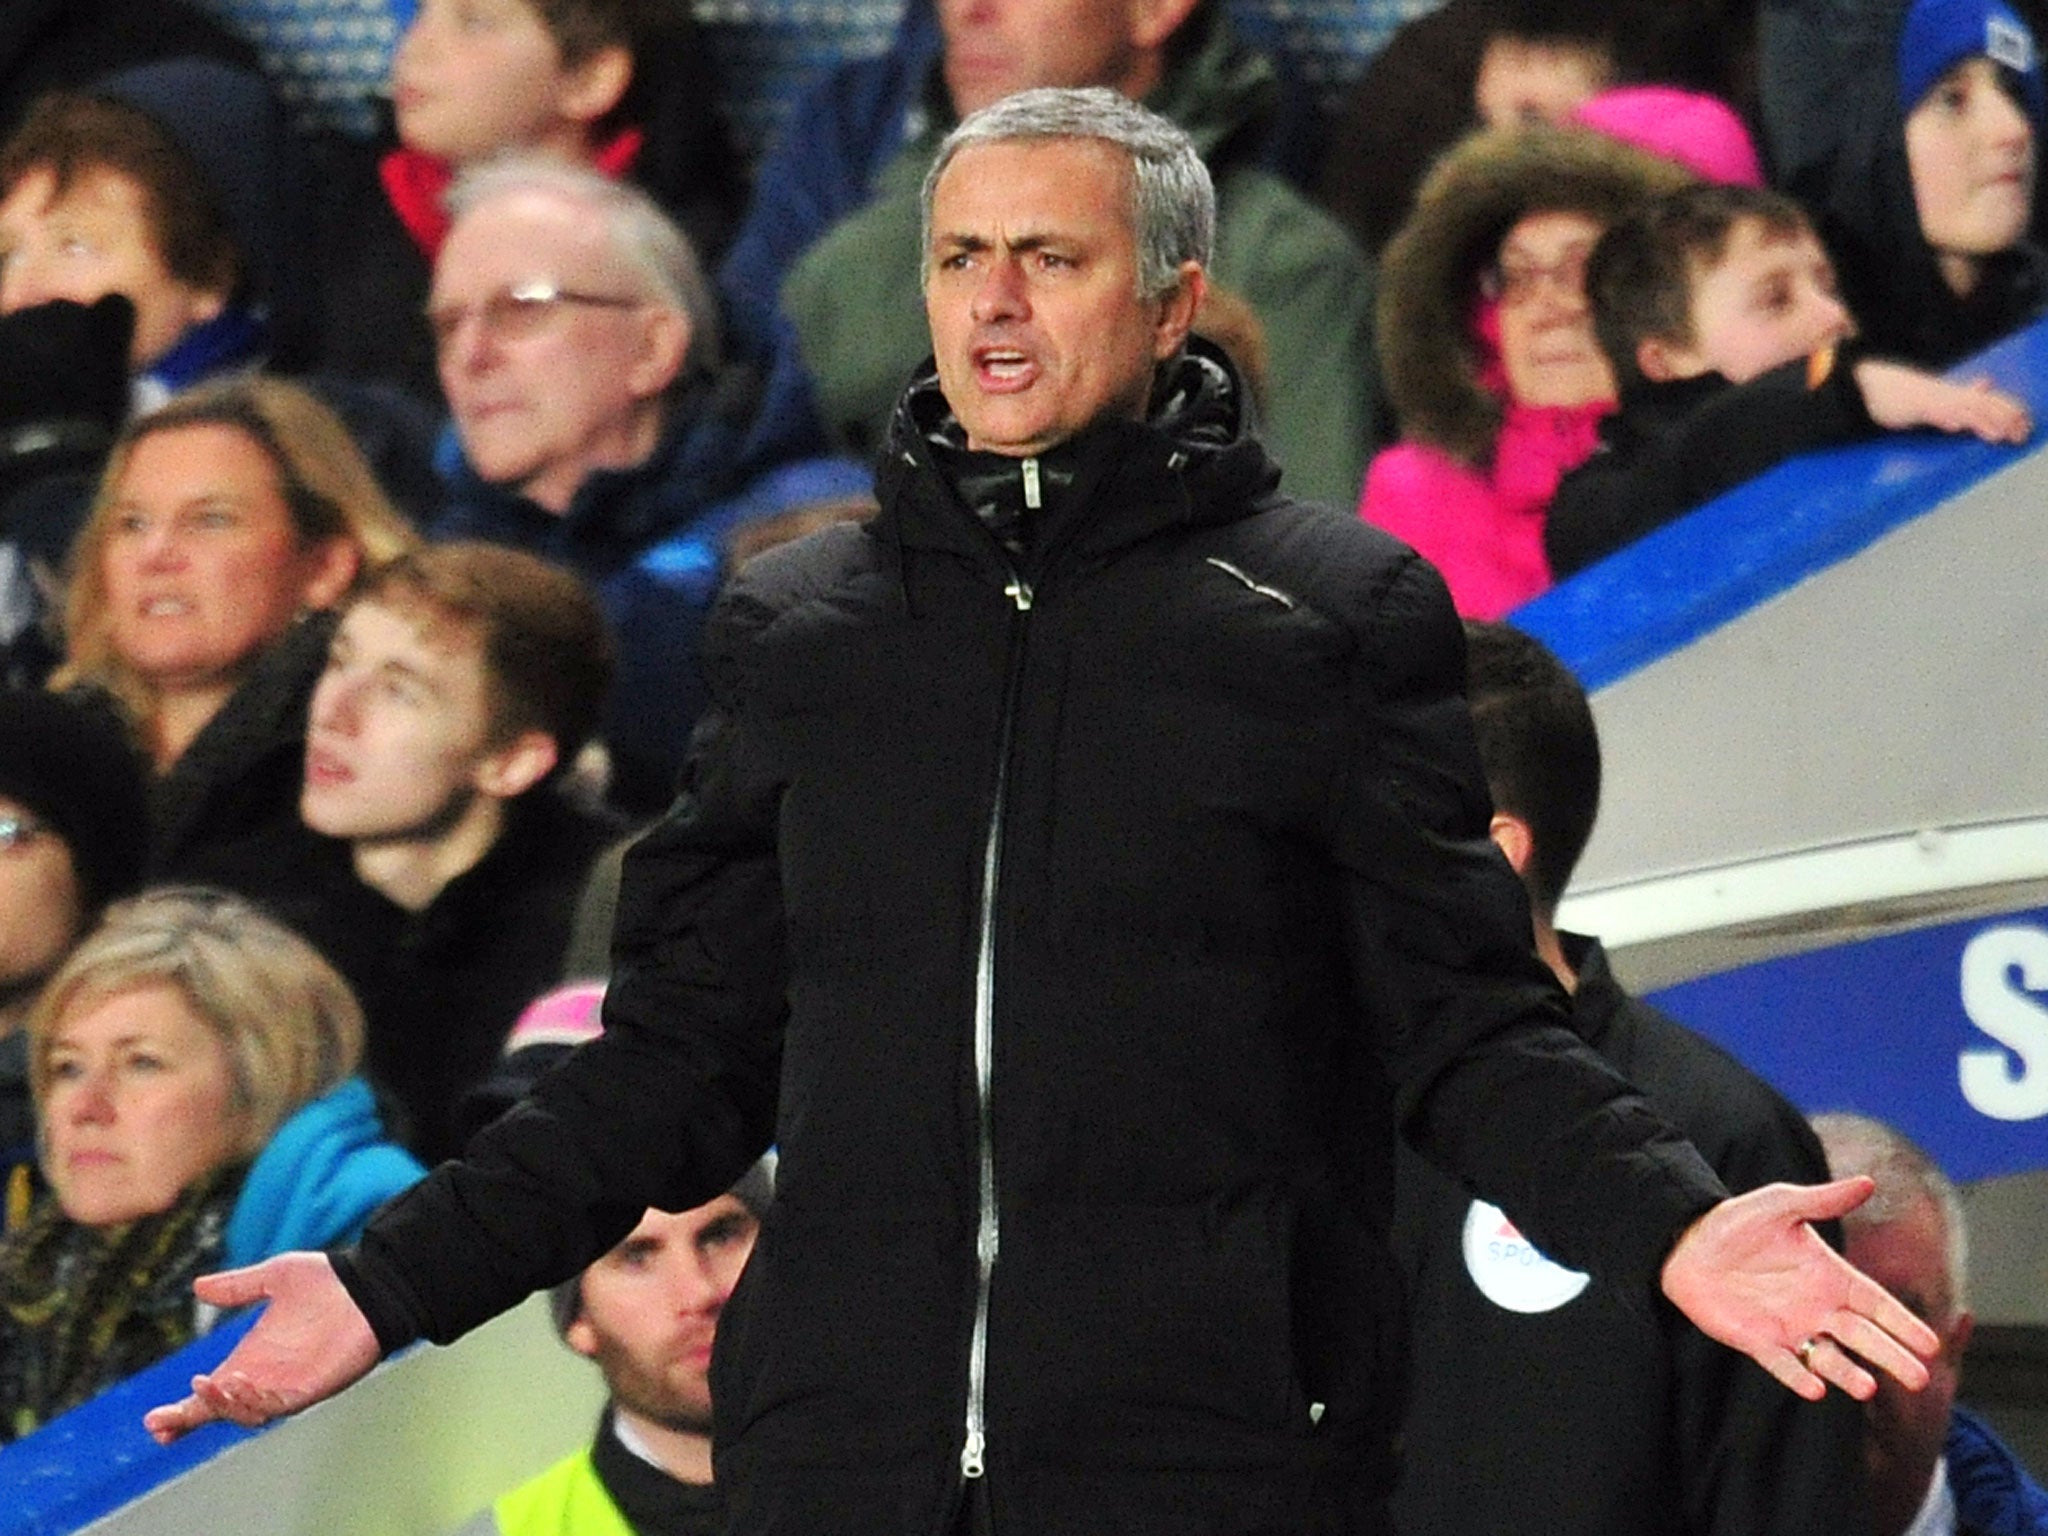 Jose Mourinho gestures from the sidelines during Chelsea's 1-0 win over Stoke